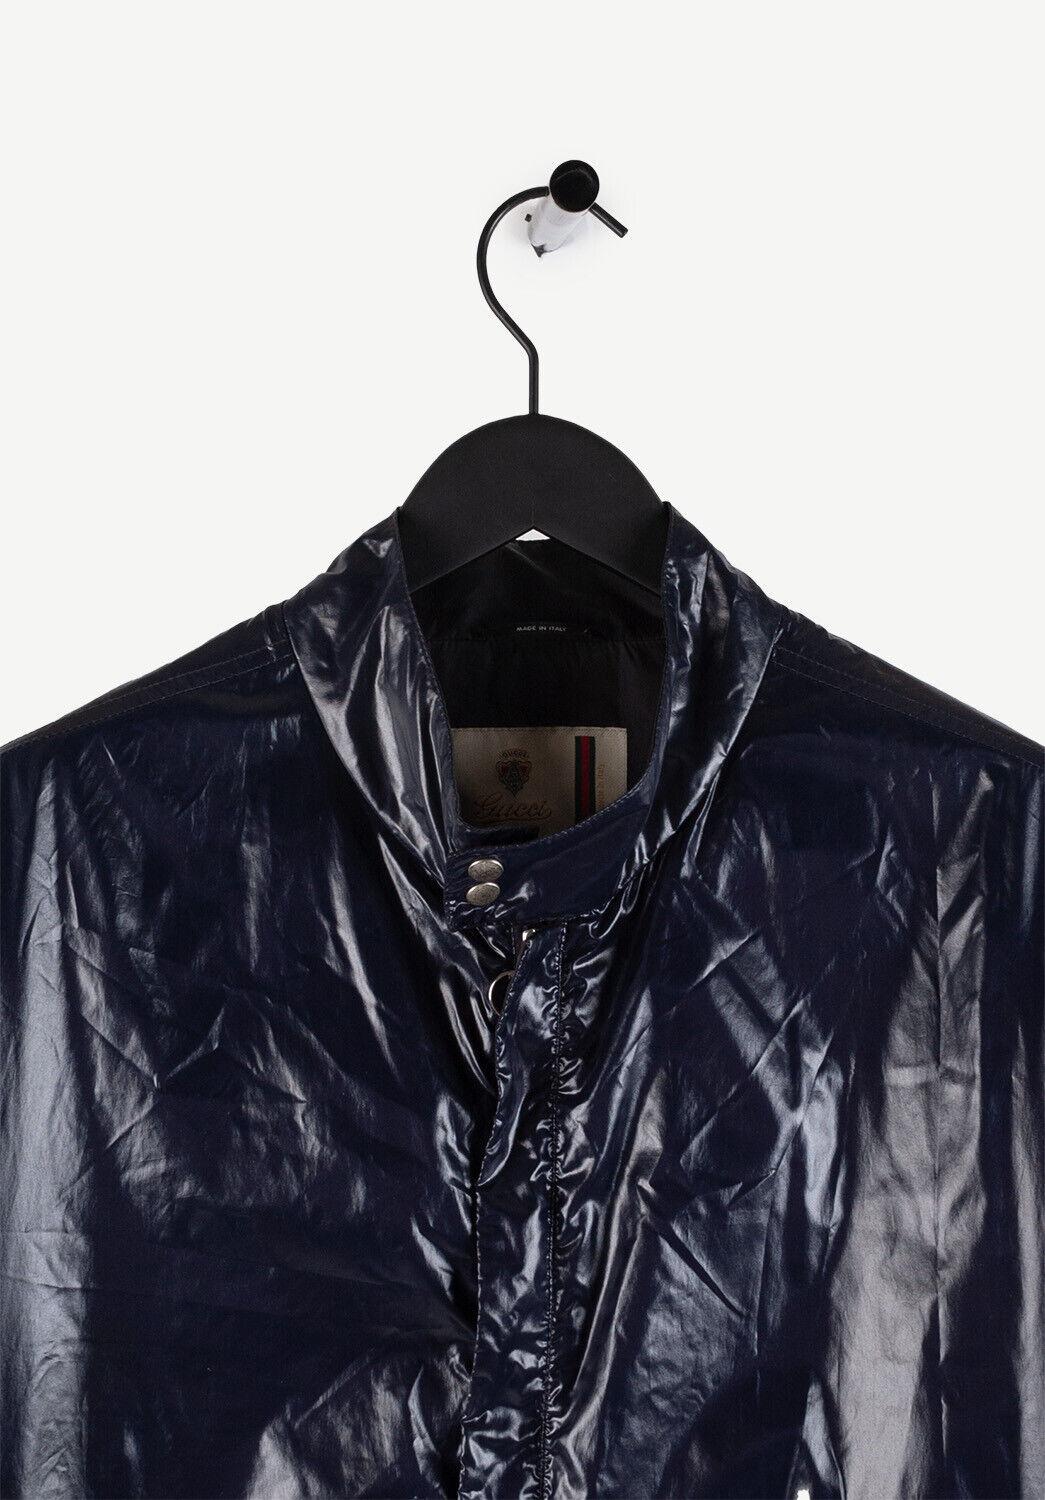  100% genuine Gucci Men Jacket, S340
Color: Navy
Material: 99% polyamide, 1% polyurethane
Tag size: 48IT(M)
This jacket is great quality item. Rate 8,5 of 10 very good condition.
Actual measurements (inches/centimeters):
Chest pit to pit:58 cm or 22